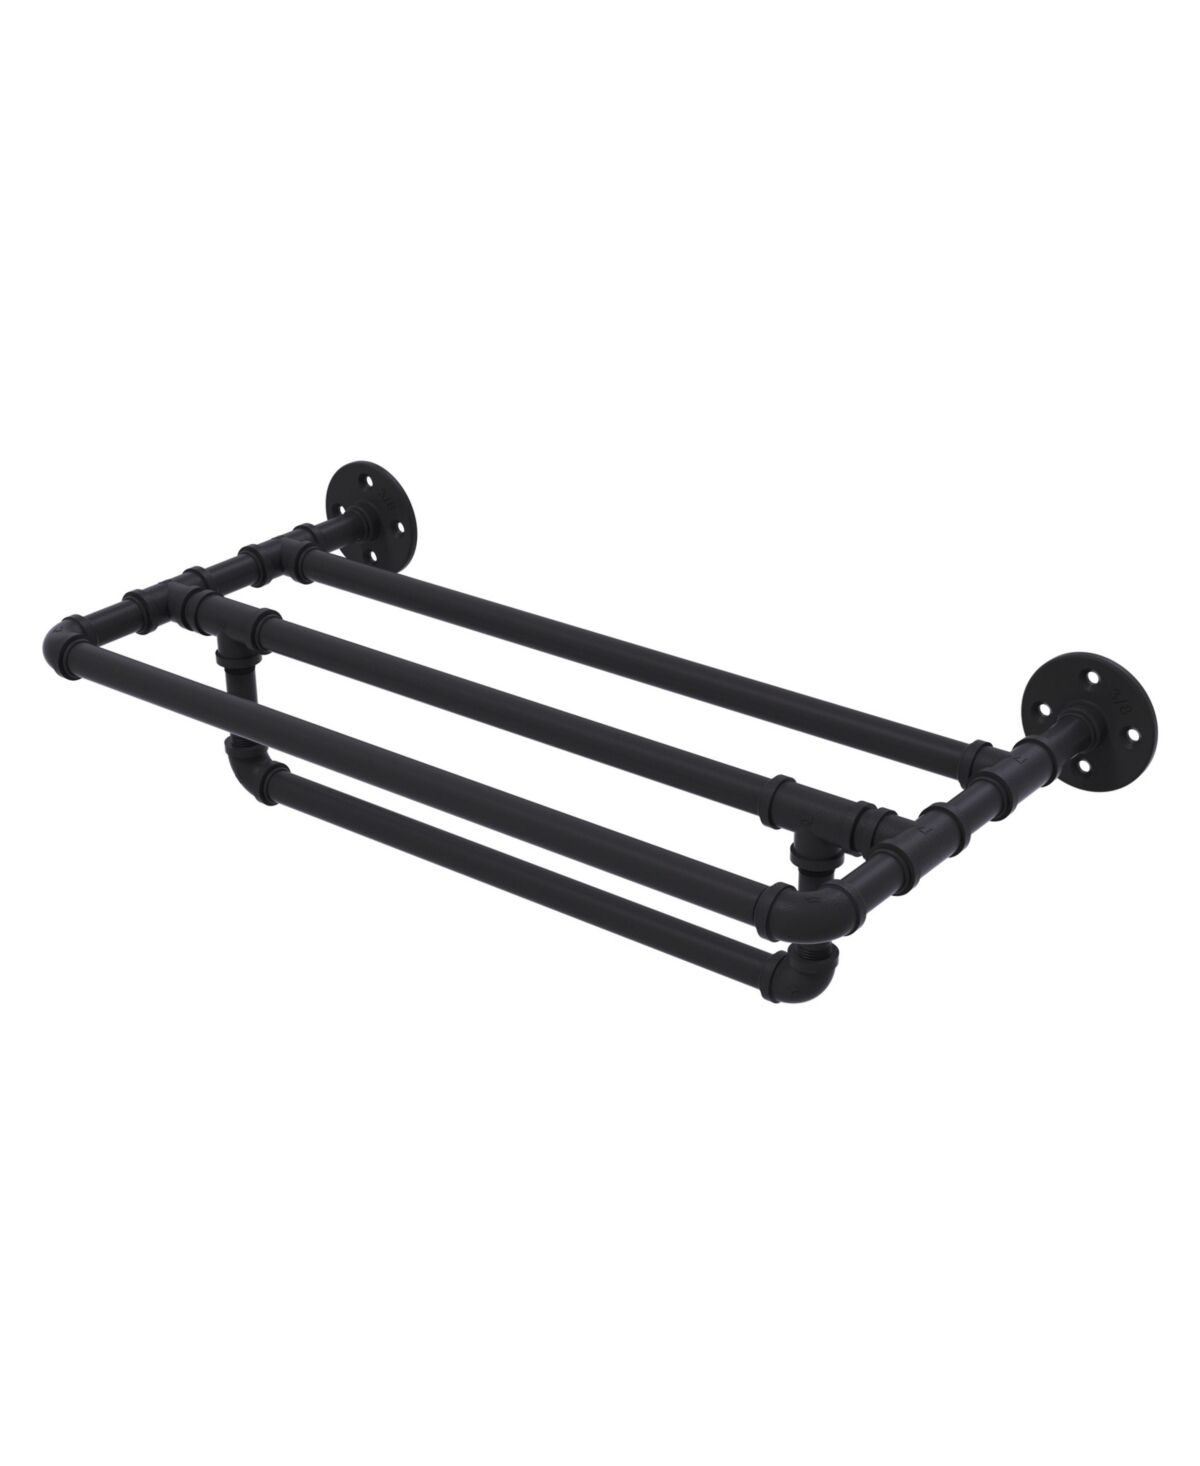 Allied Pipeline Collection 18 Inch Wall Mounted Towel Shelf with Towel Bar - Matte black